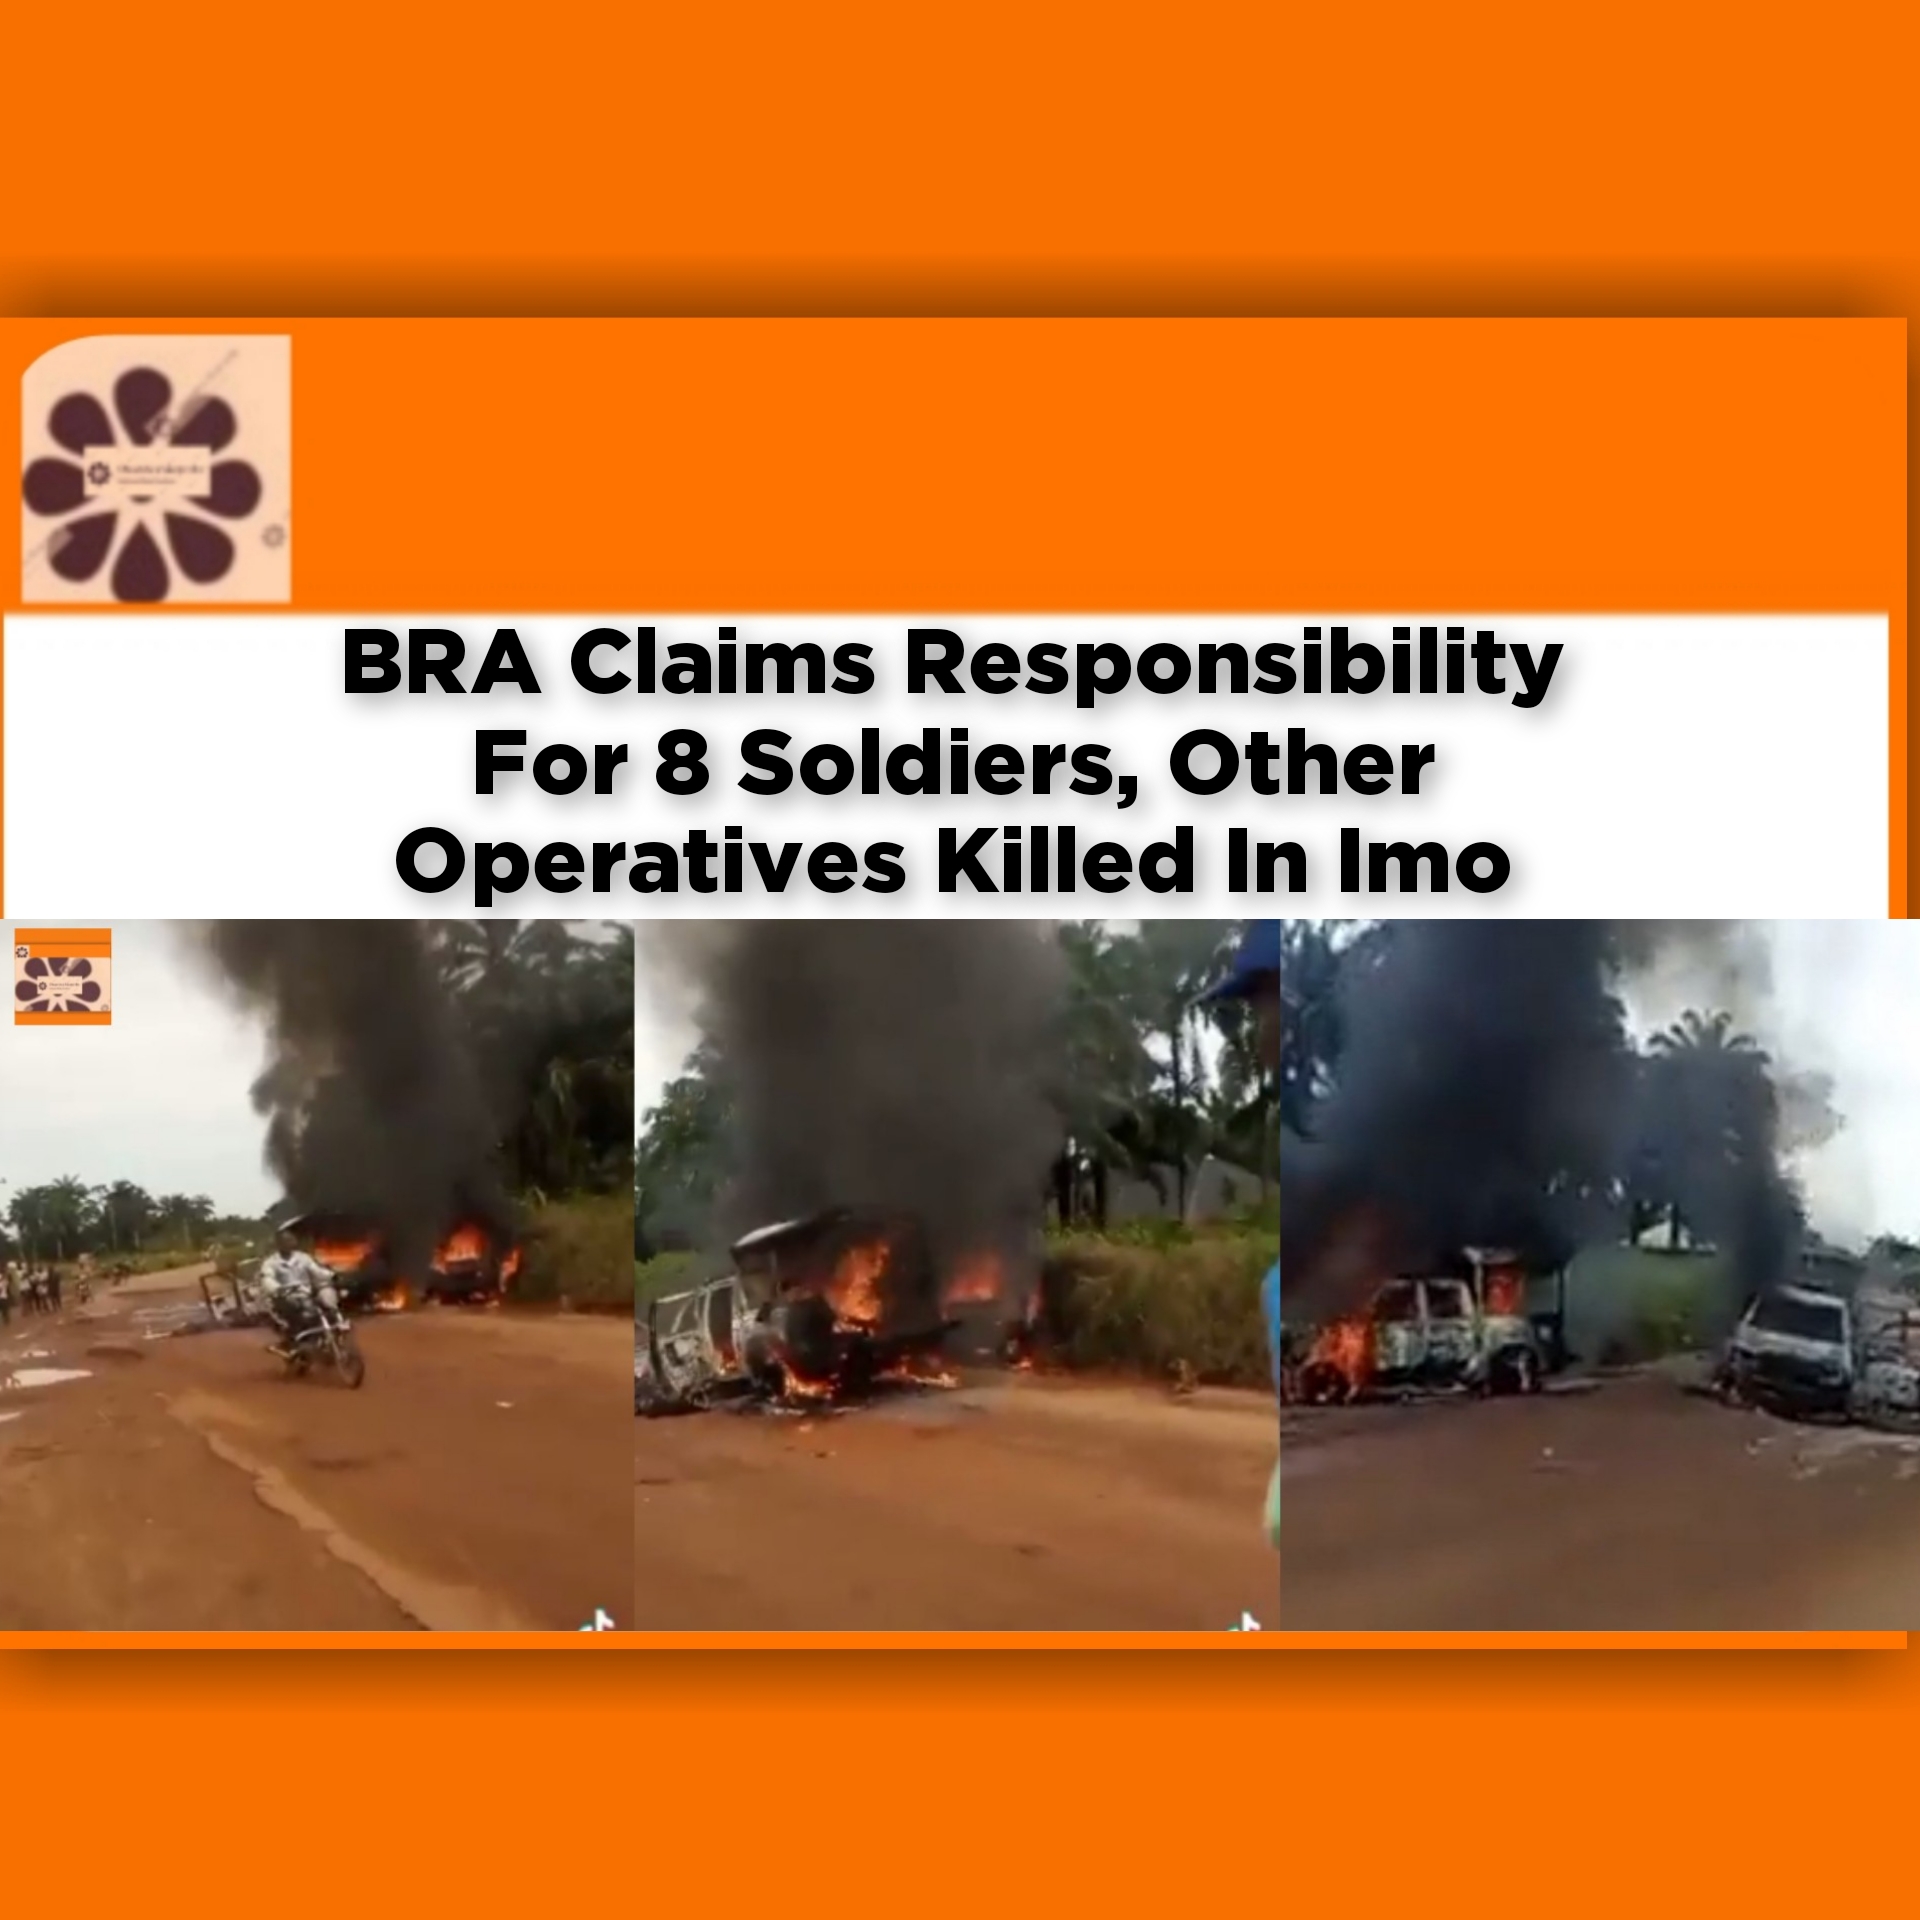 BRA Claims Responsibility For 8 Soldiers, Other Operatives Killed In Imo ~ OsazuwaAkonedo #Imo